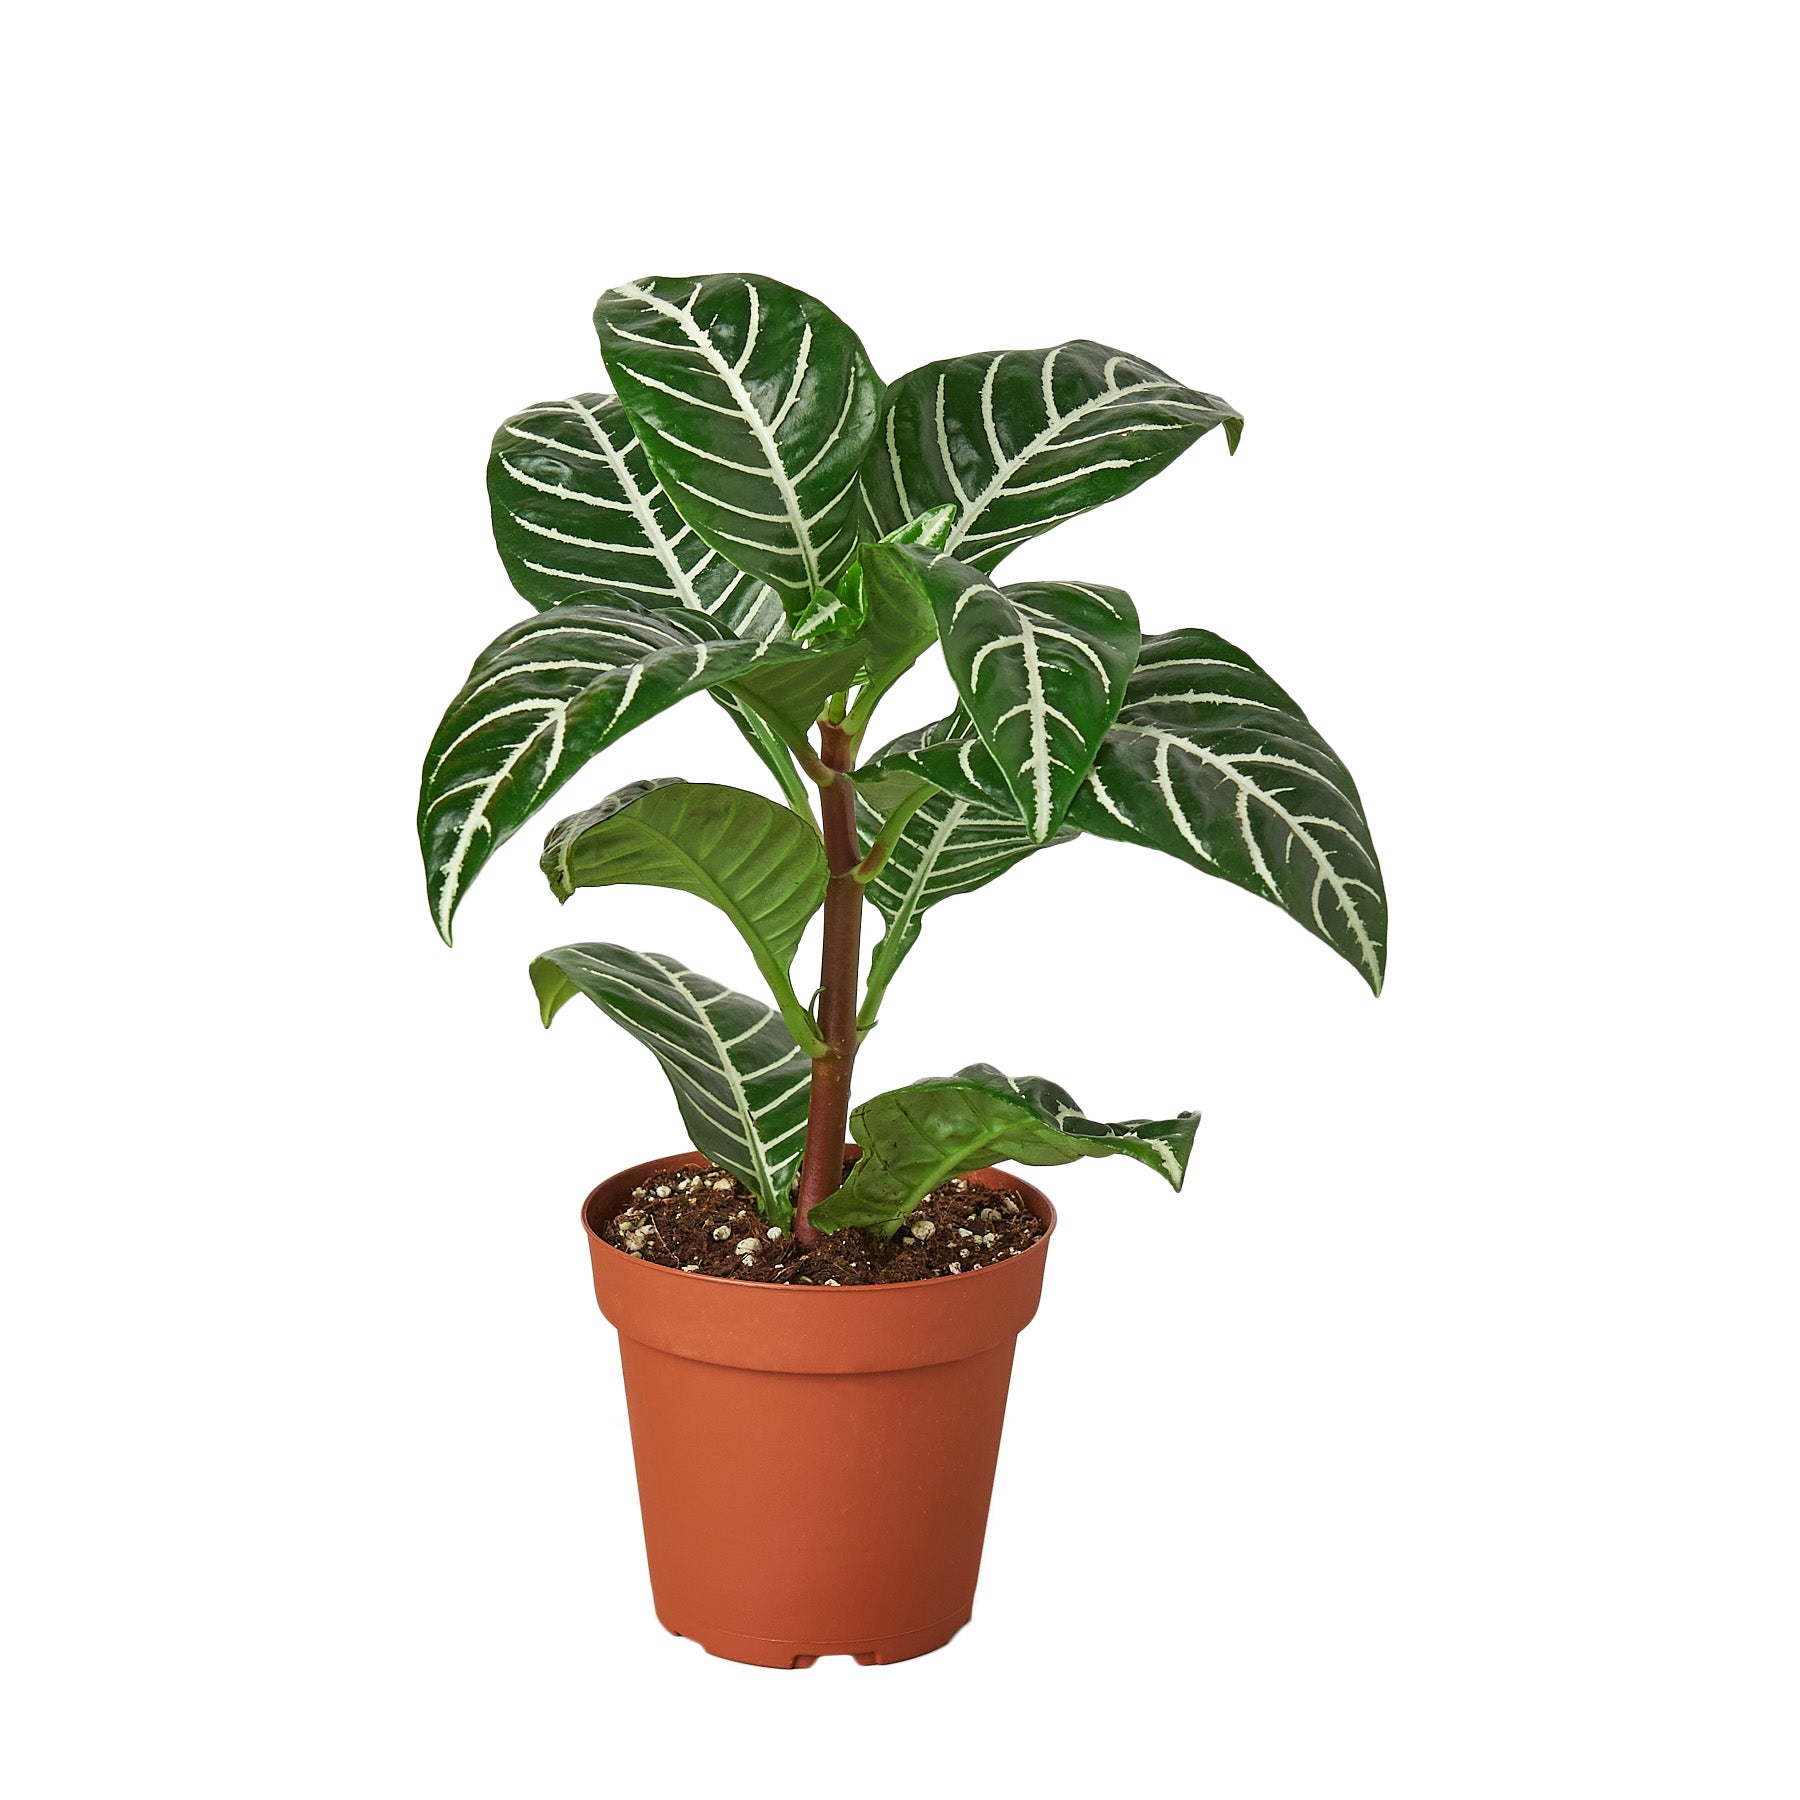 A potted plant on a white background at a garden center.